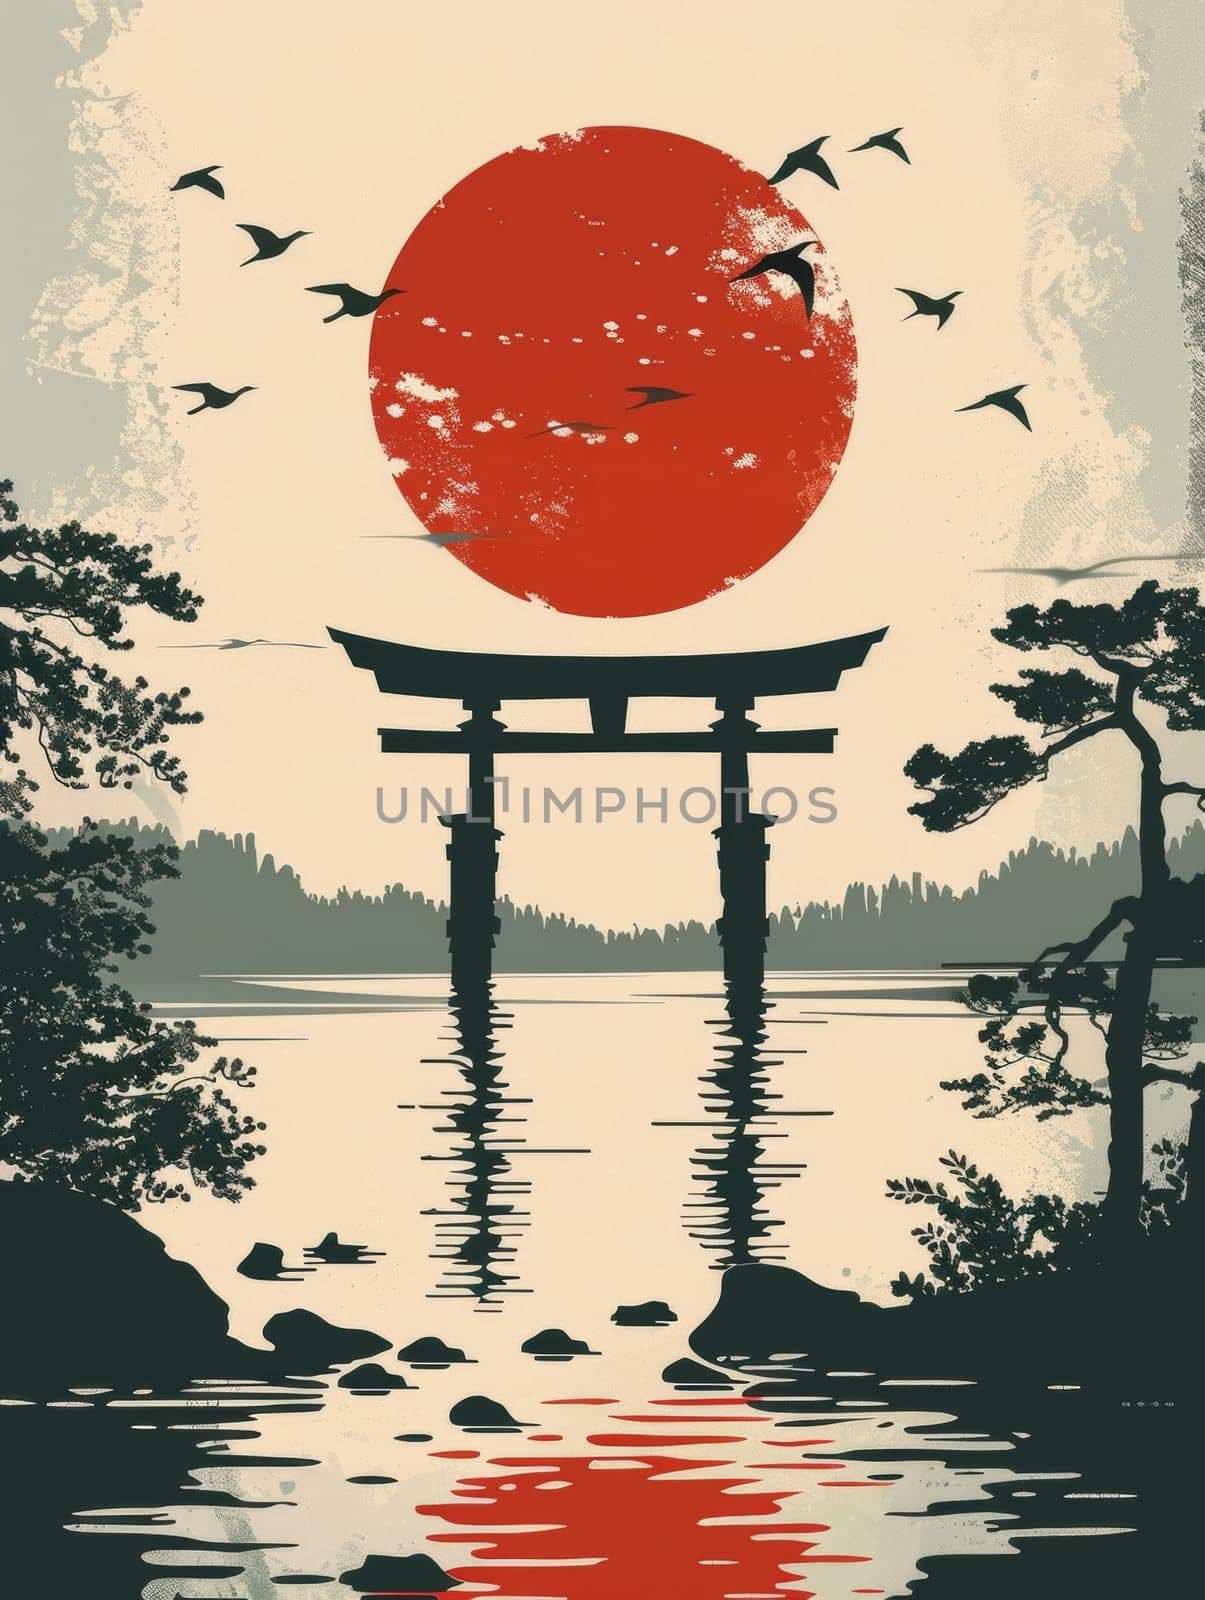 A serene scene with a traditional Torii gate overlooking a calm lake, set against a large red sun and a flight of birds at dusk. by sfinks